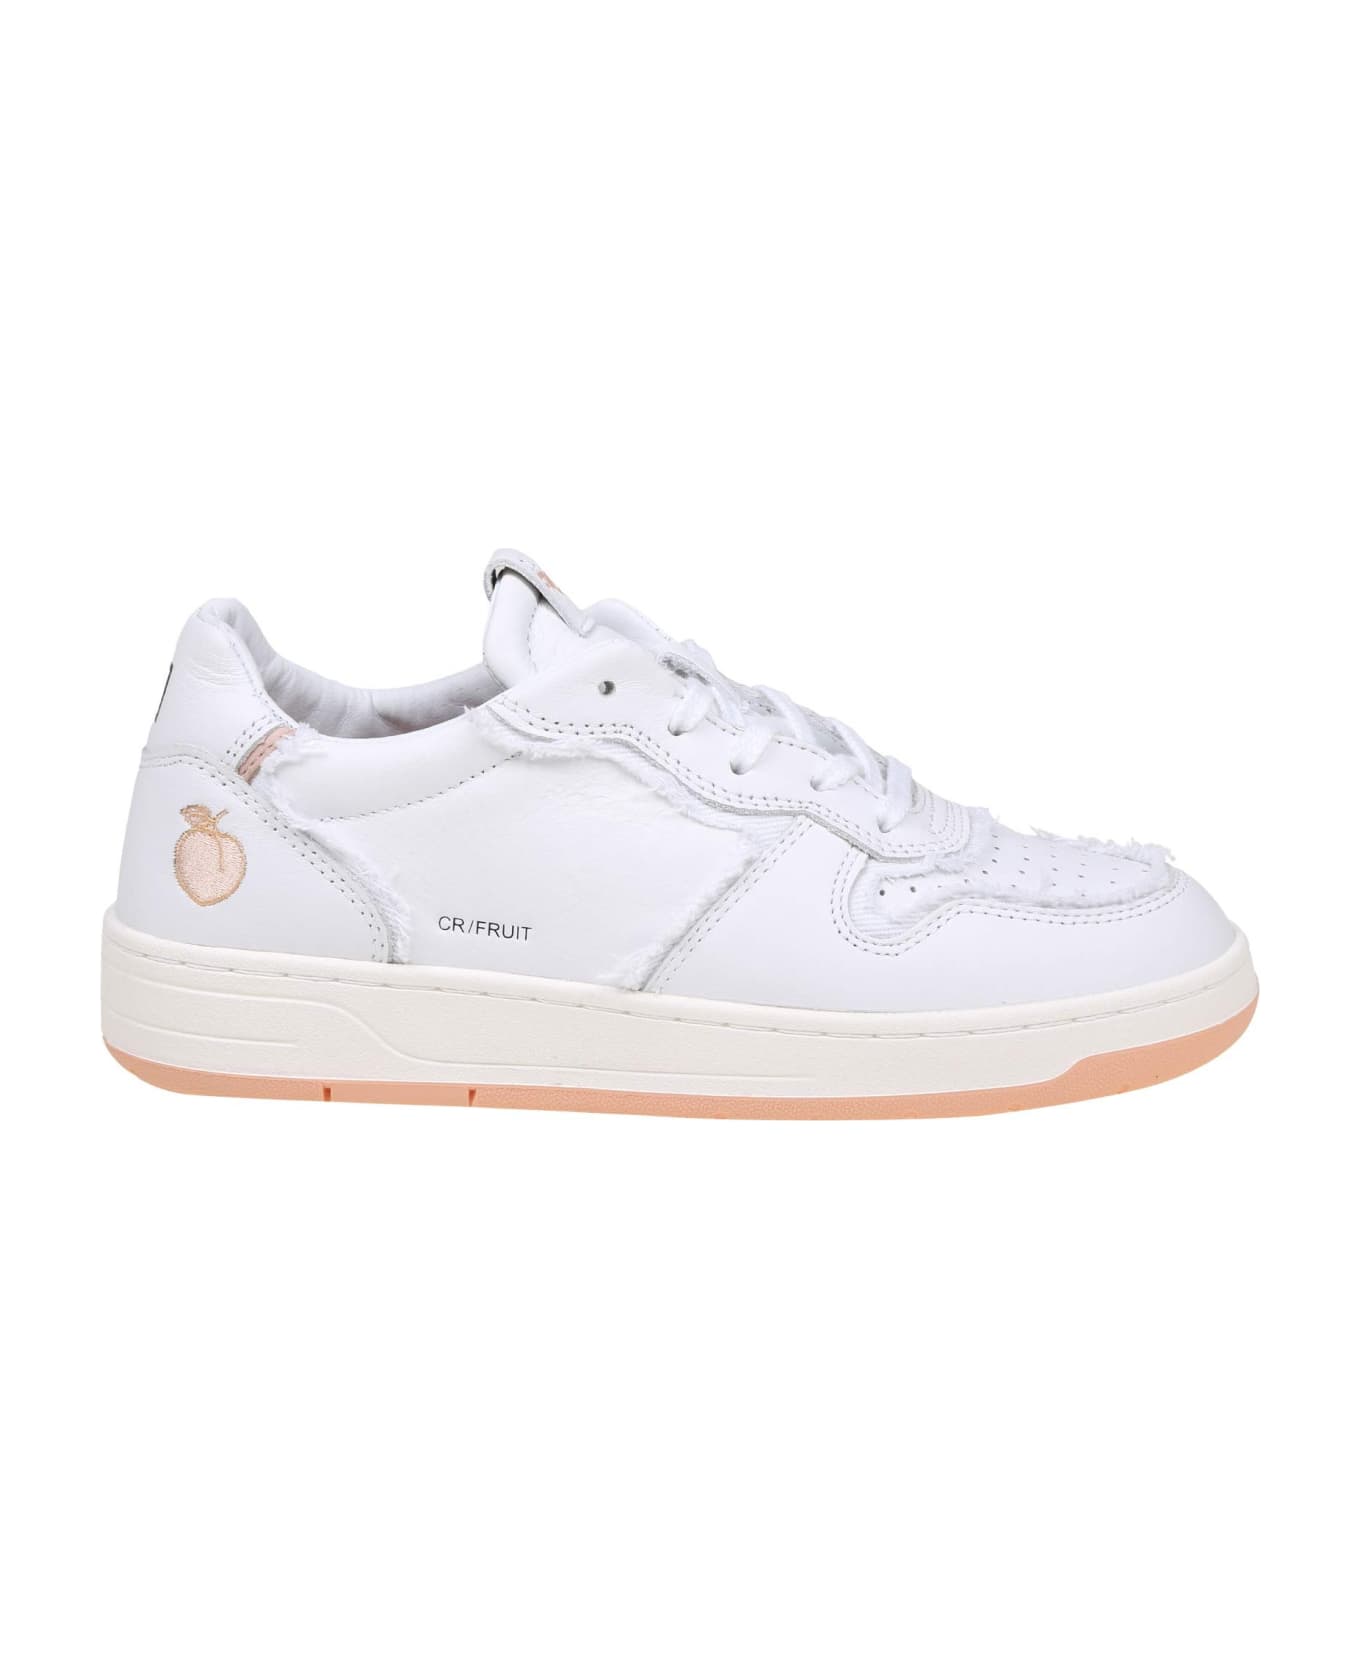 D.A.T.E. Court Sneakers In White Leather - Peach